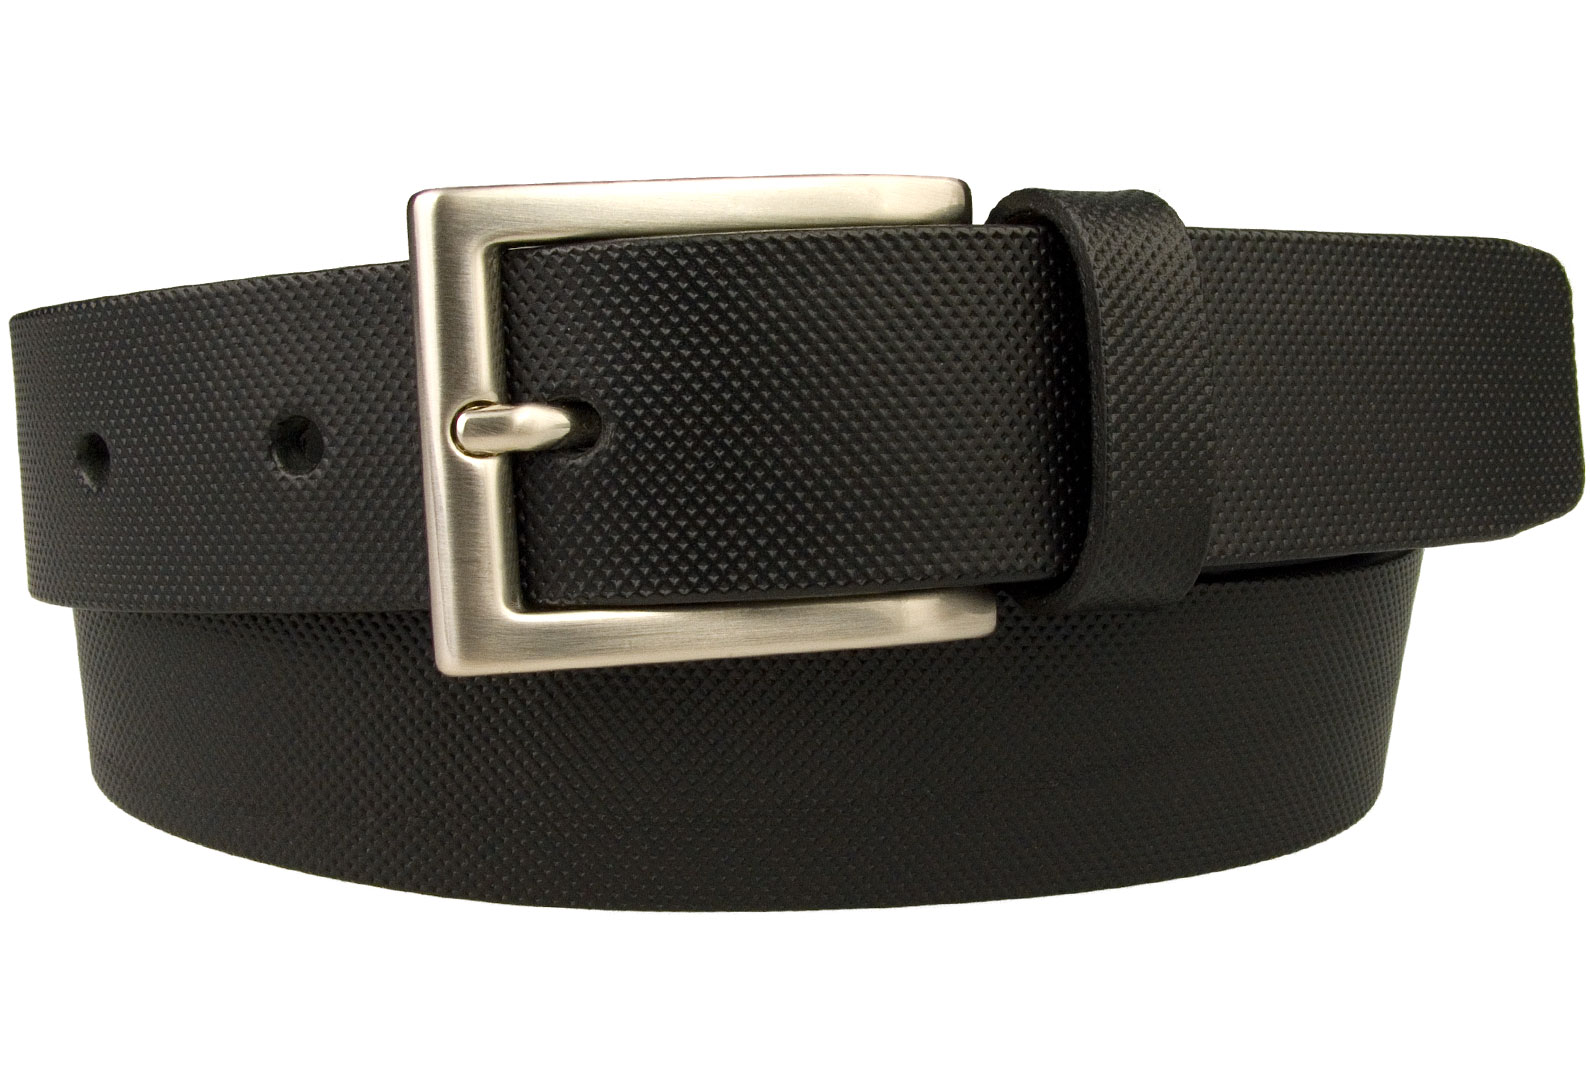 Engineering Knurl Pattern Belt. Black Leather Belt 1 3/16 inch (3cm) Wide Approx. Ideal For Suits and Smart Pants. Made with Italian Full Grain Vegetable Tanned Leather. Italian made hand brushed nickel plated buckle. Made In UK By British Craftsmen. Long Lasting 4mm thick leather.